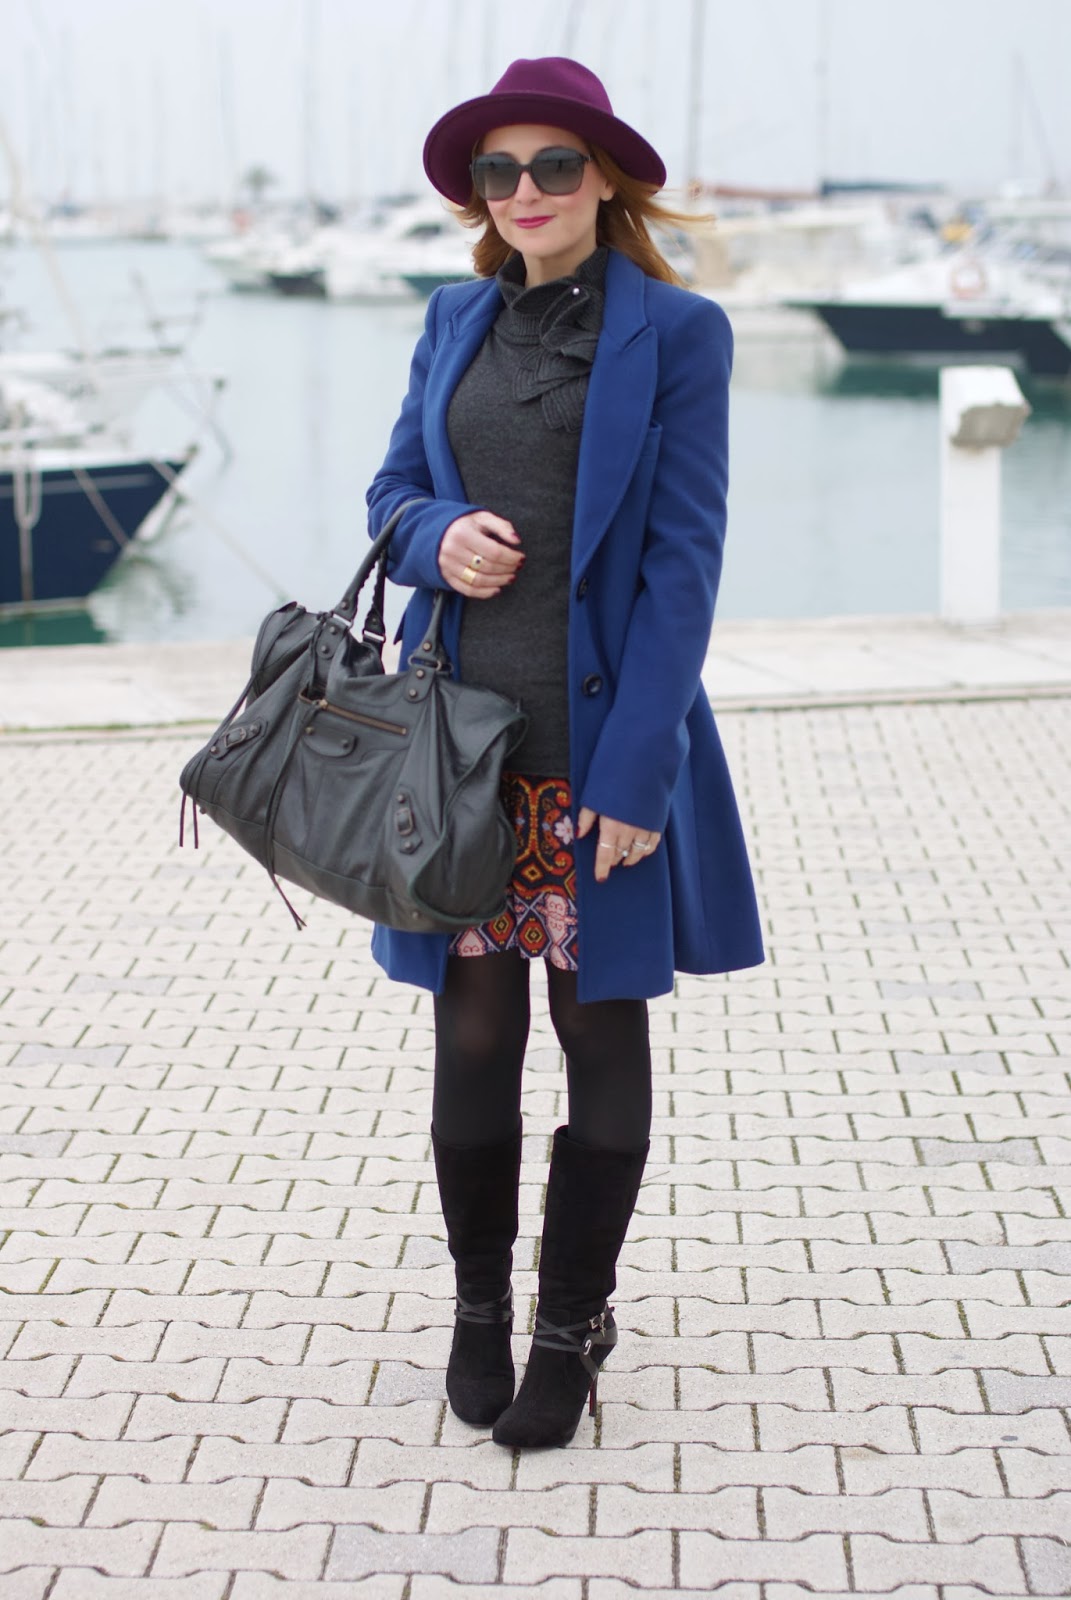 Blue coat on a windy day | Fashion and Cookies - fashion and beauty blog